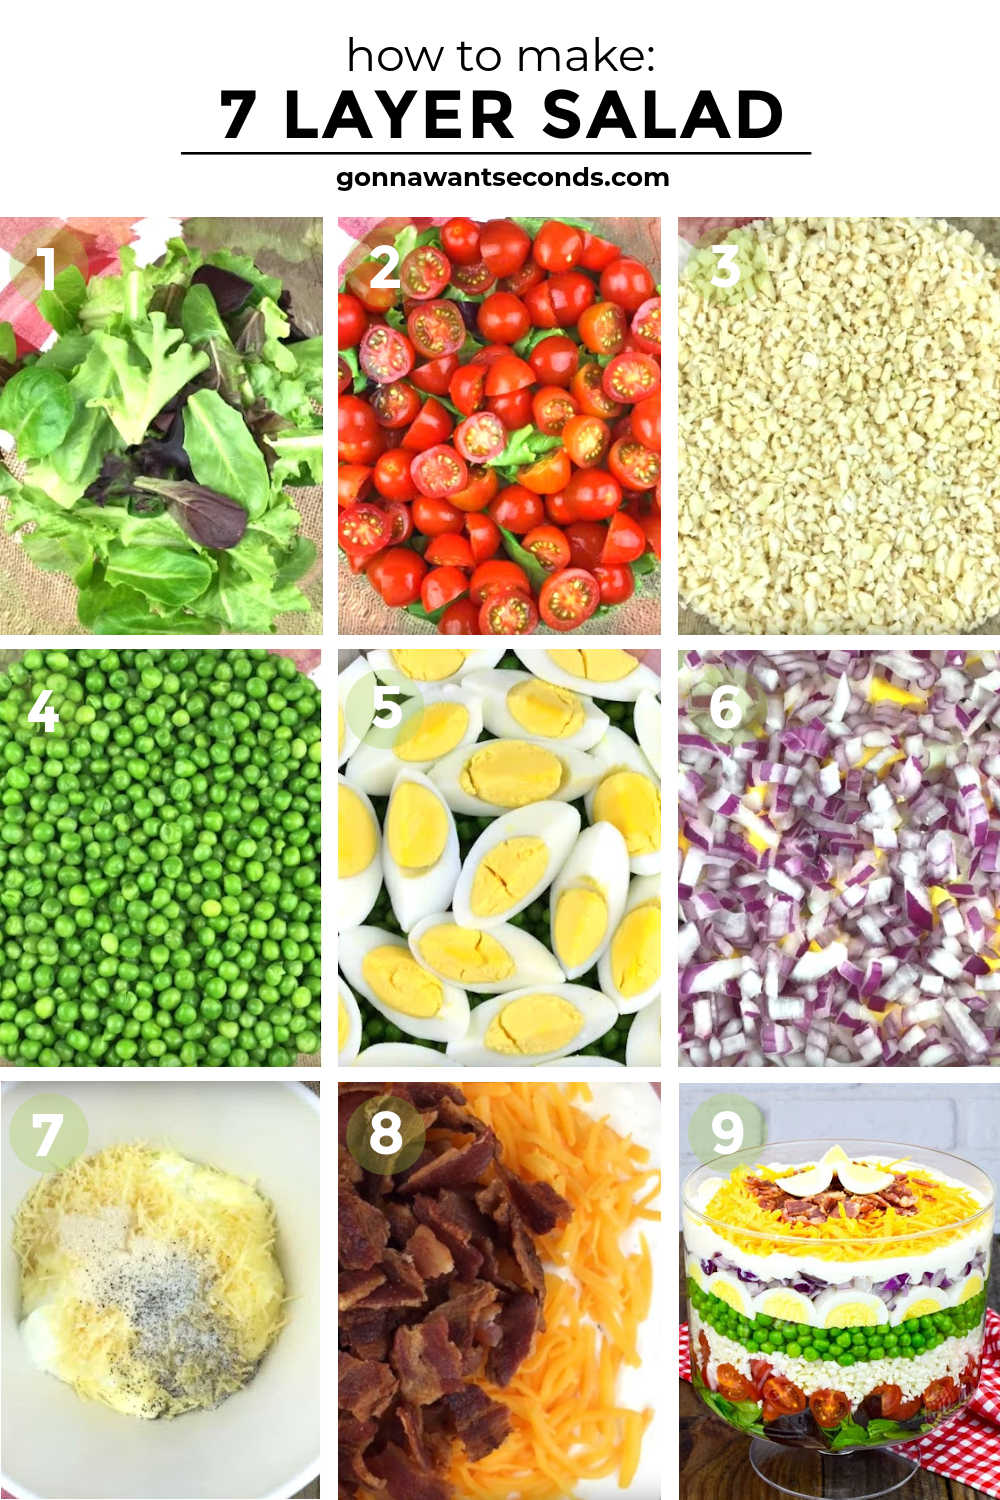 Step by step how to make 7 layer salad